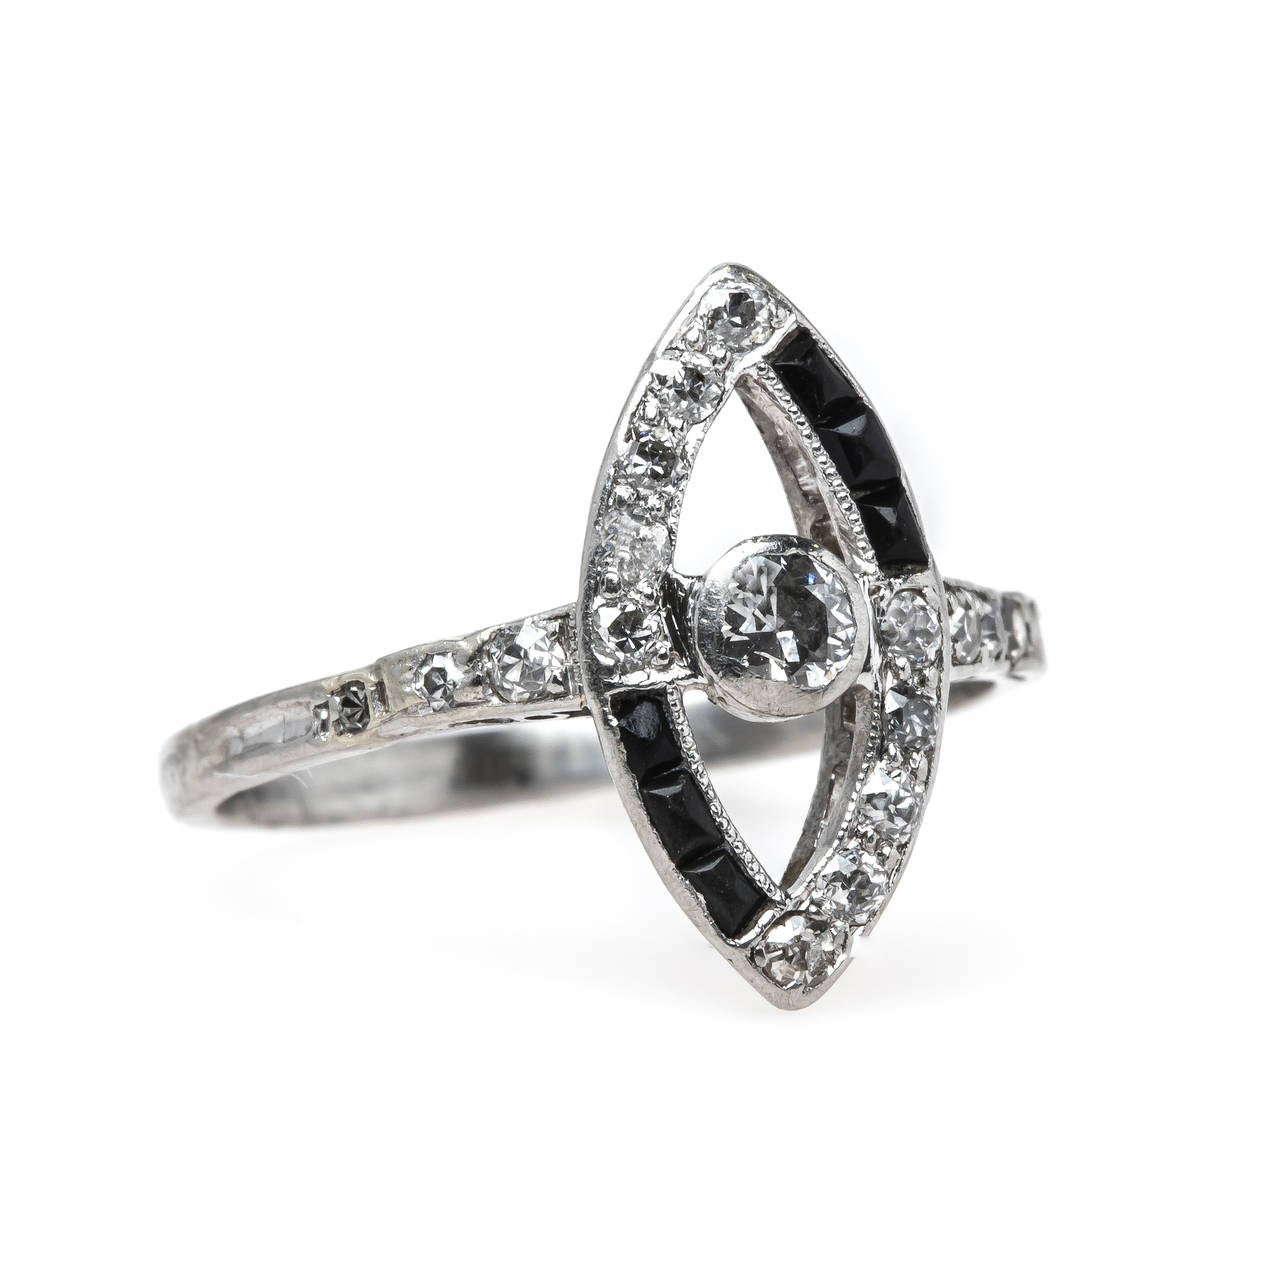 Emeryville is a remarkably unusual Art Deco (circa 1925) platinum navette shaped ring centering a bezel set Old European Cut diamond gauged at 0.12ct and framed by a marquise shaped halo of sixteen Old Full Cut diamonds totaling approximately 0.28ct